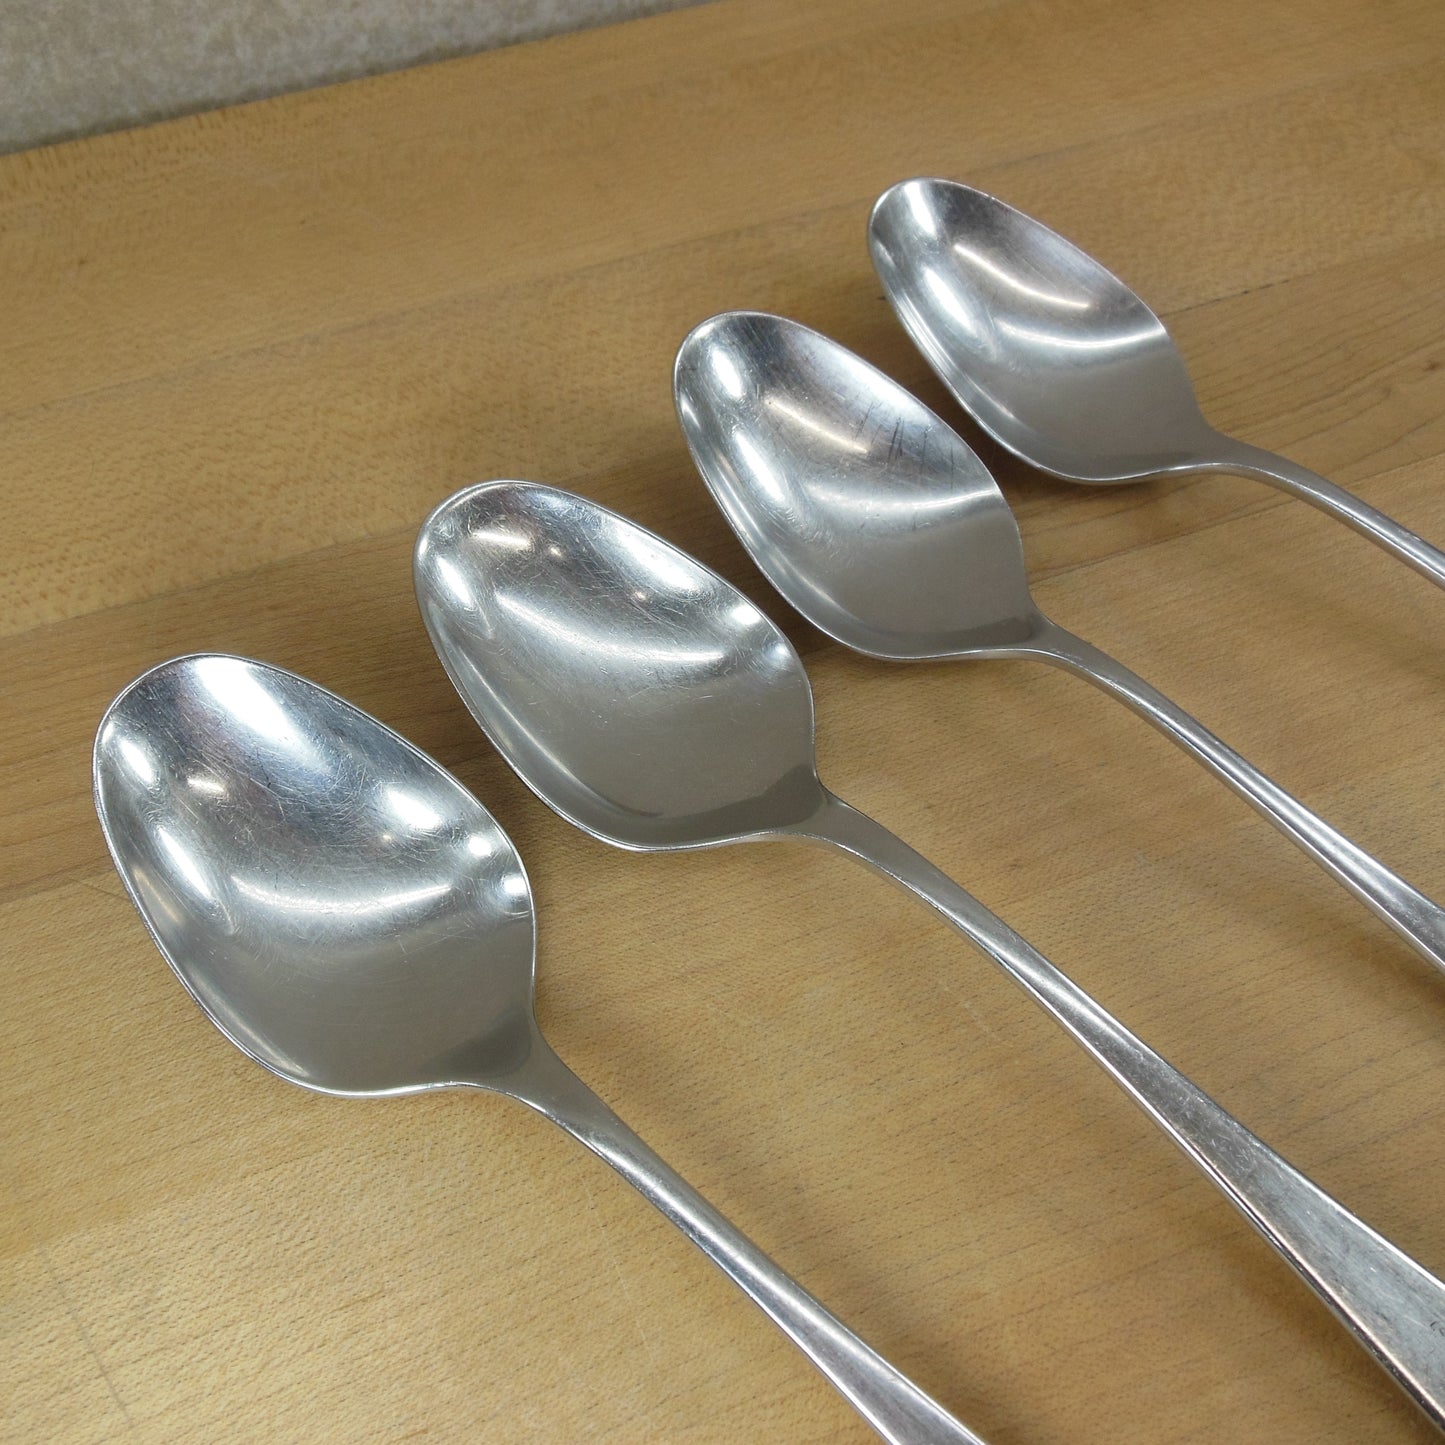 WMF Germany Cromargan Stainless Finesse Flatware - 4 Set Place Spoons Vintage